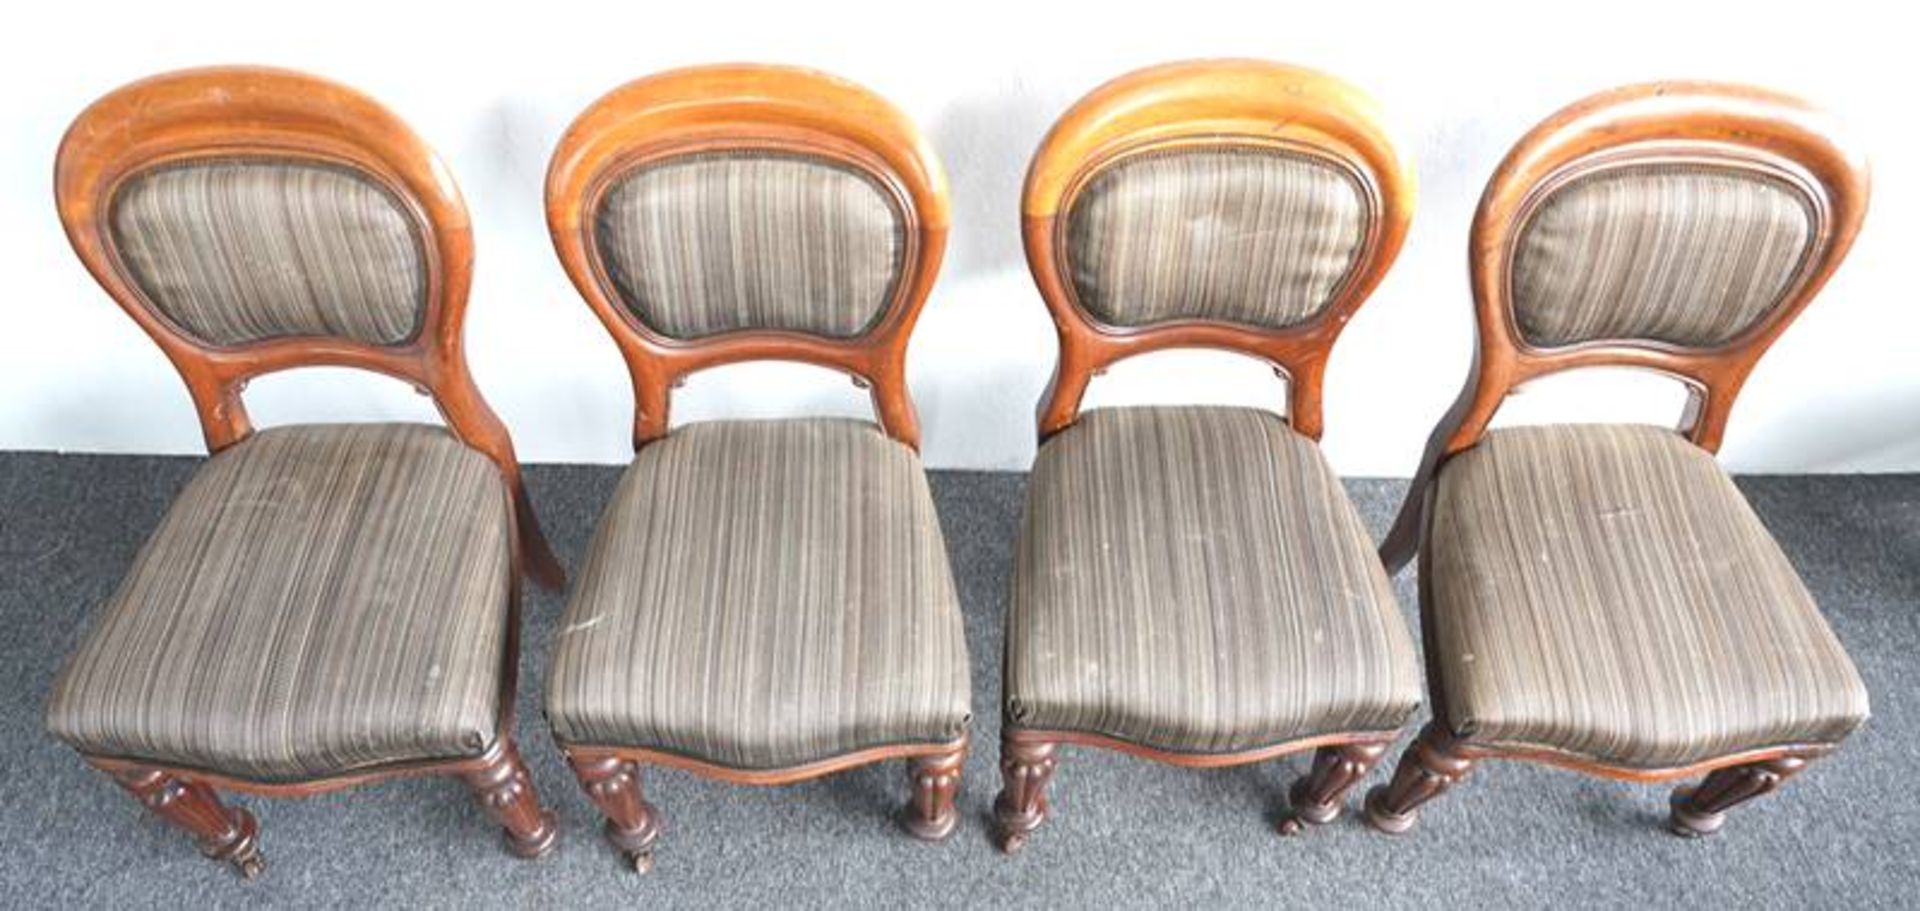 7 Louis Philippe chairs - Image 3 of 6